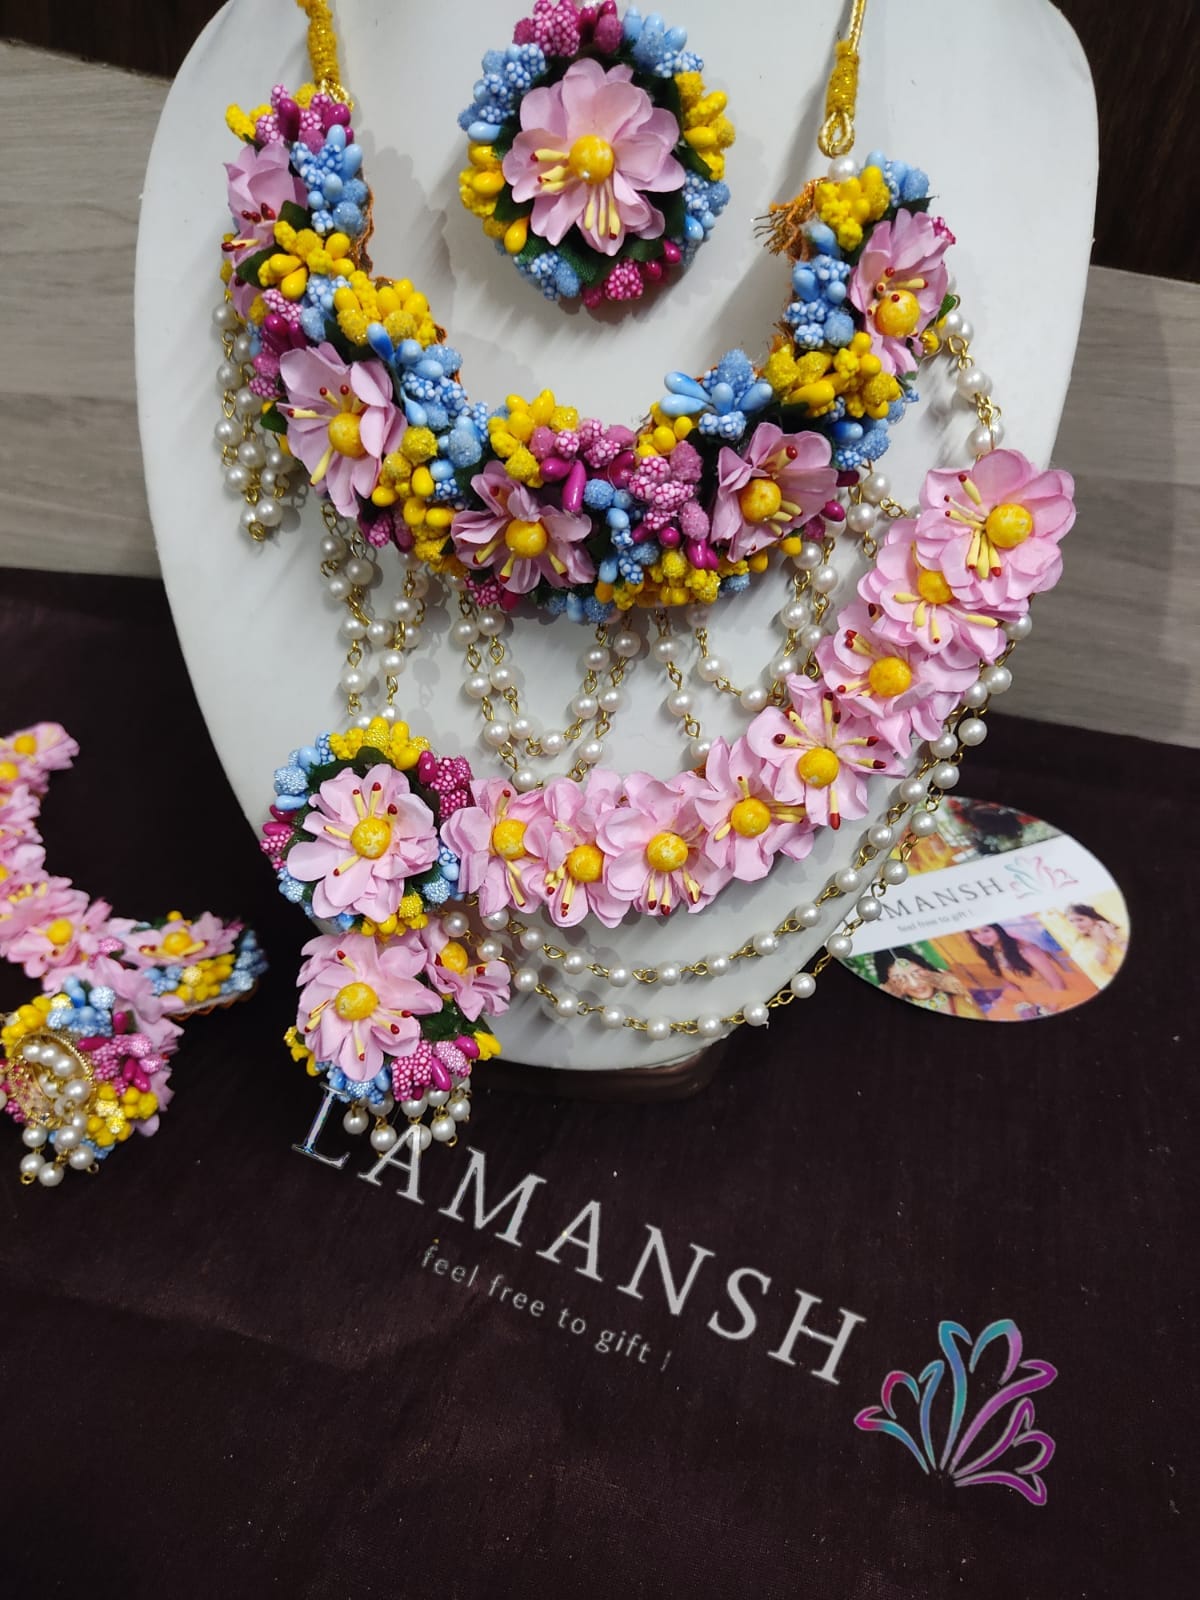 New Jaipur Handicraft latest floral sets Pink- Blue-Yellow / Free Size / Bridal Look Lamansh® 🌺 Floral Jewellery Set with extended clips in the Earrings / Flower Bridal set